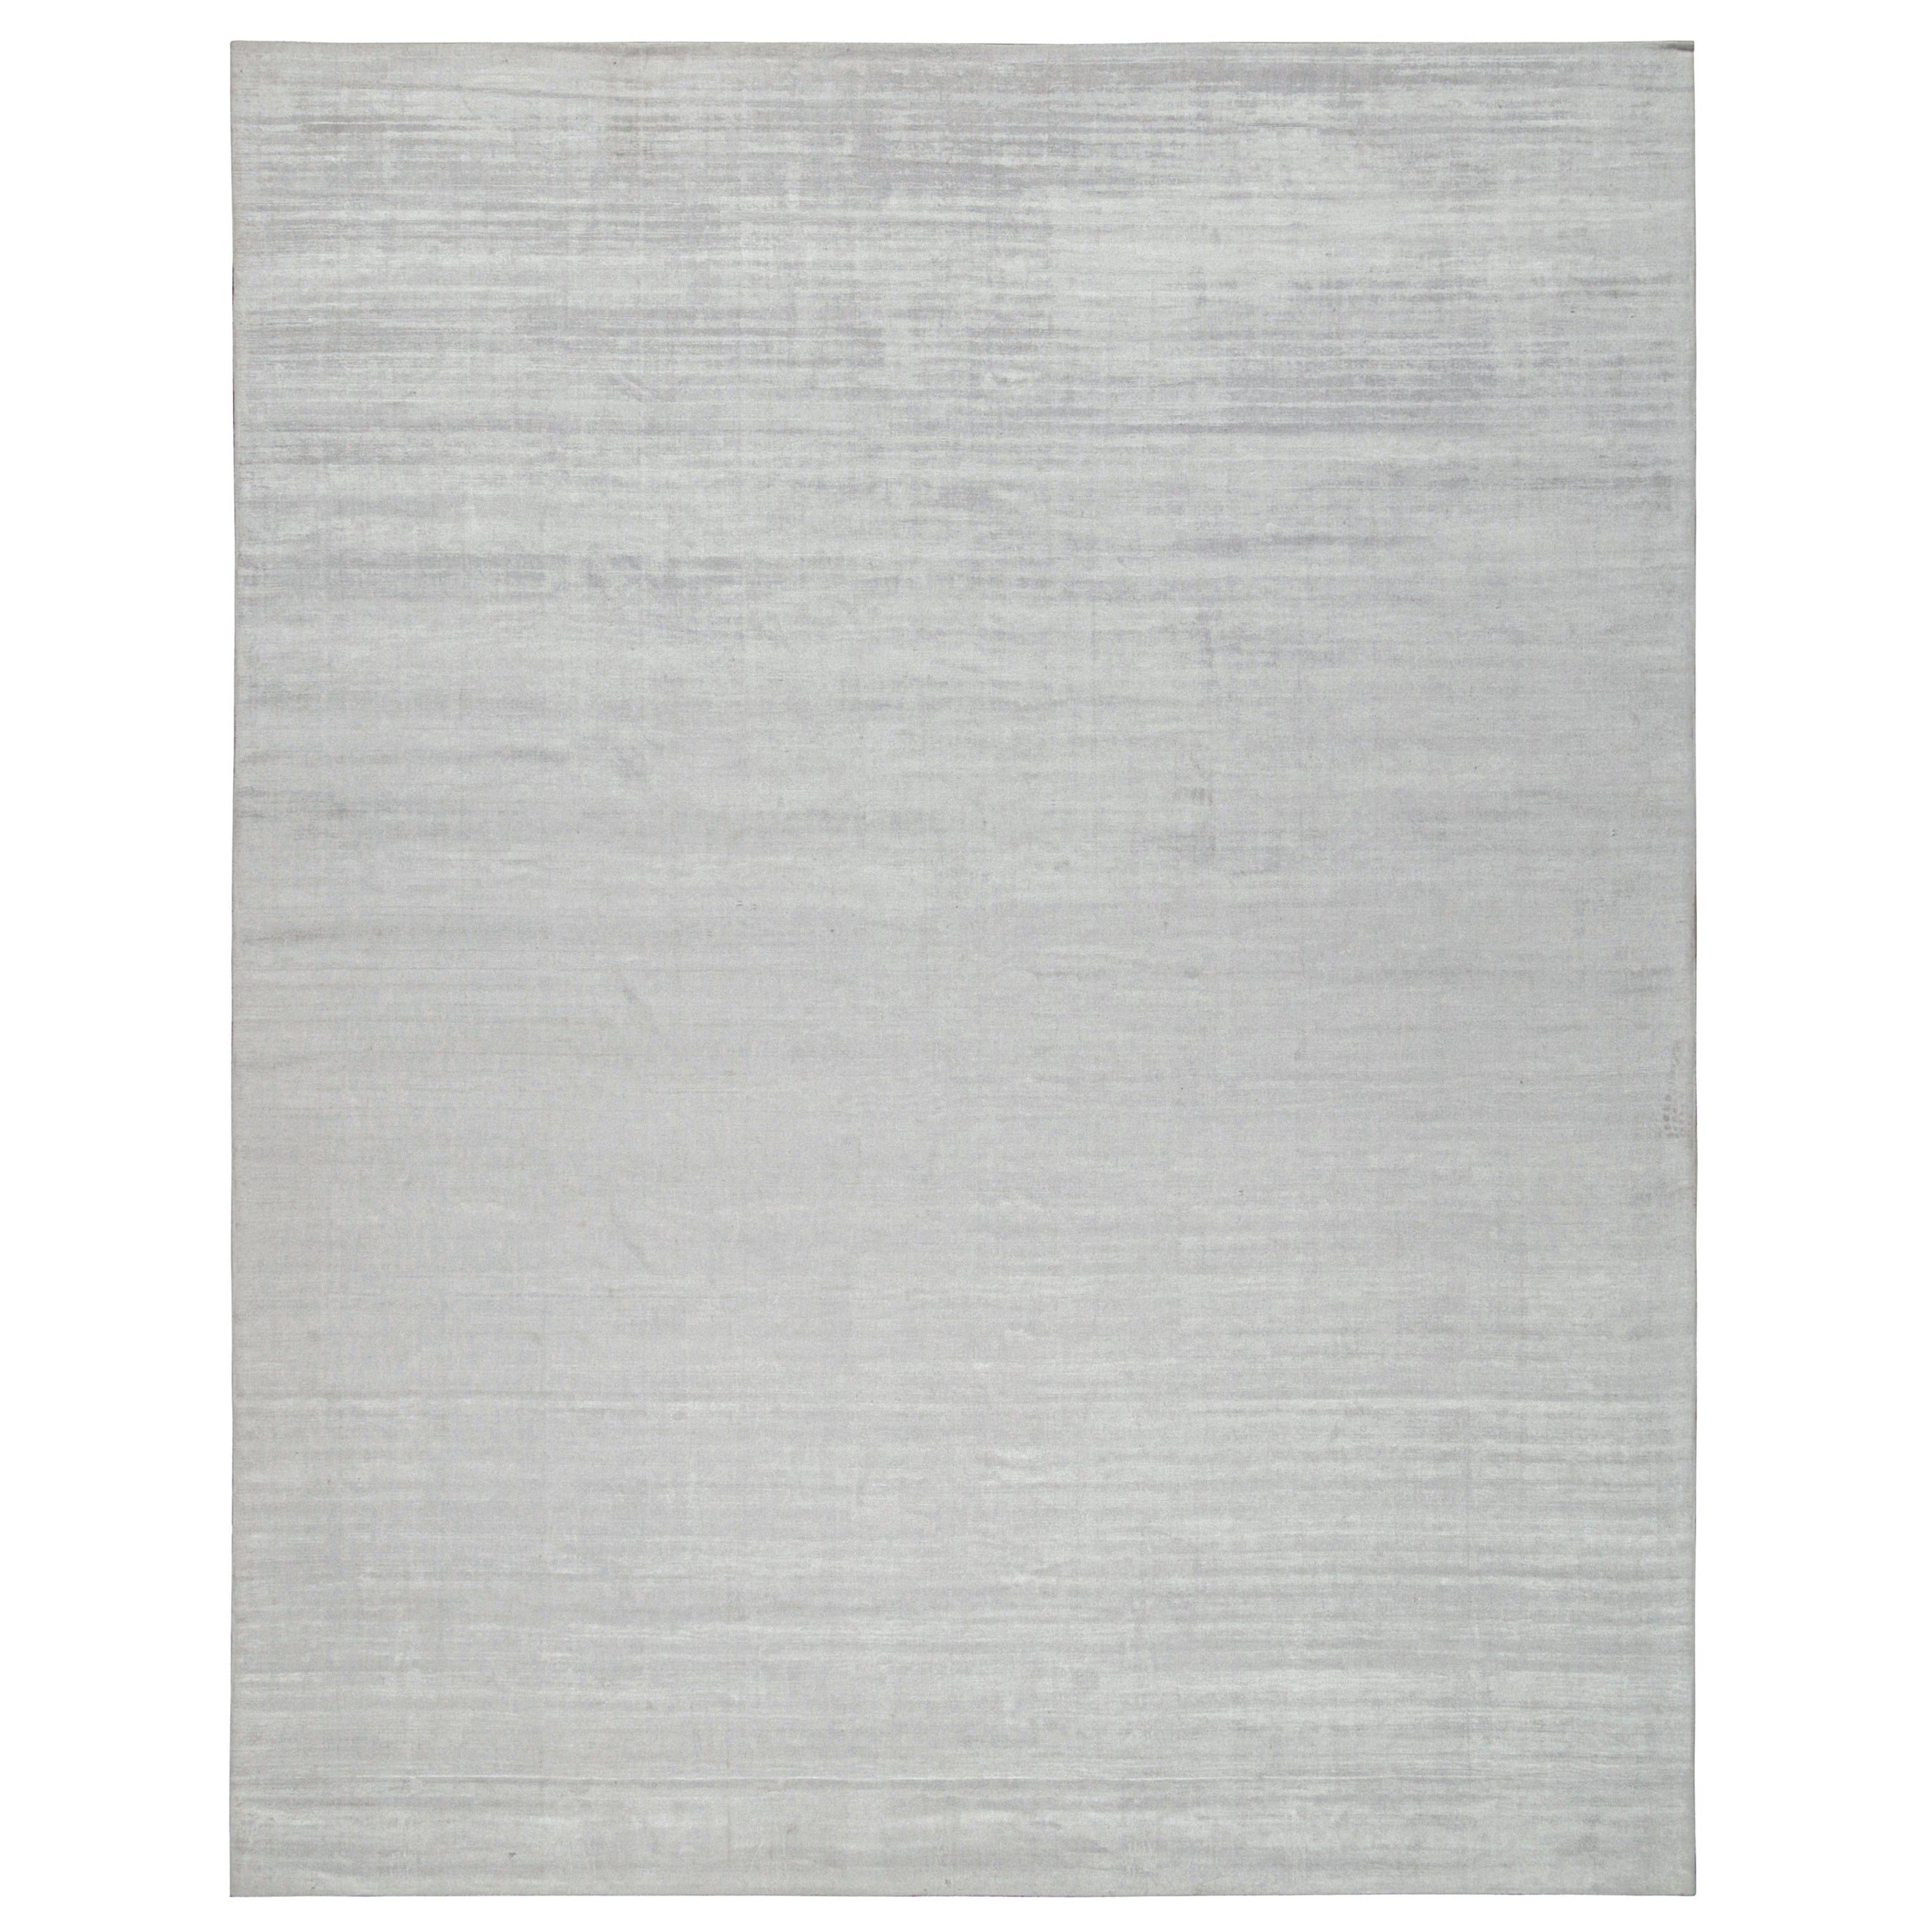 Rug & Kilim’s Modern Rug in Solid Grey and Off-White Striae